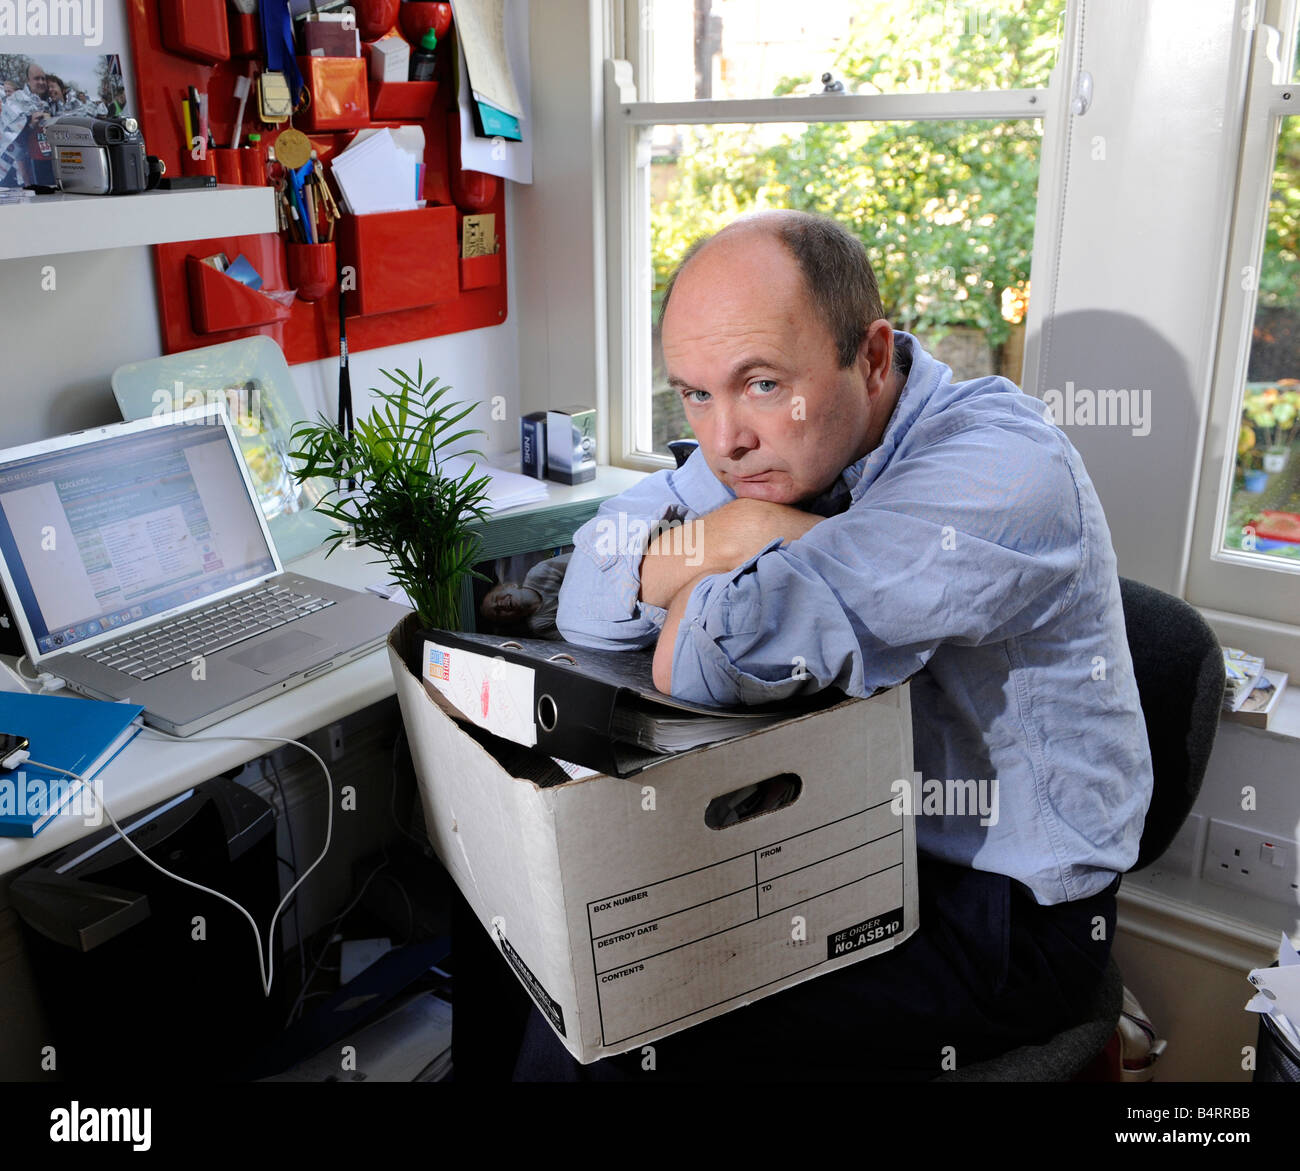 Sad and worried man packs up his desk and belongings after losing his job, being made redundant, being fired Stock Photo